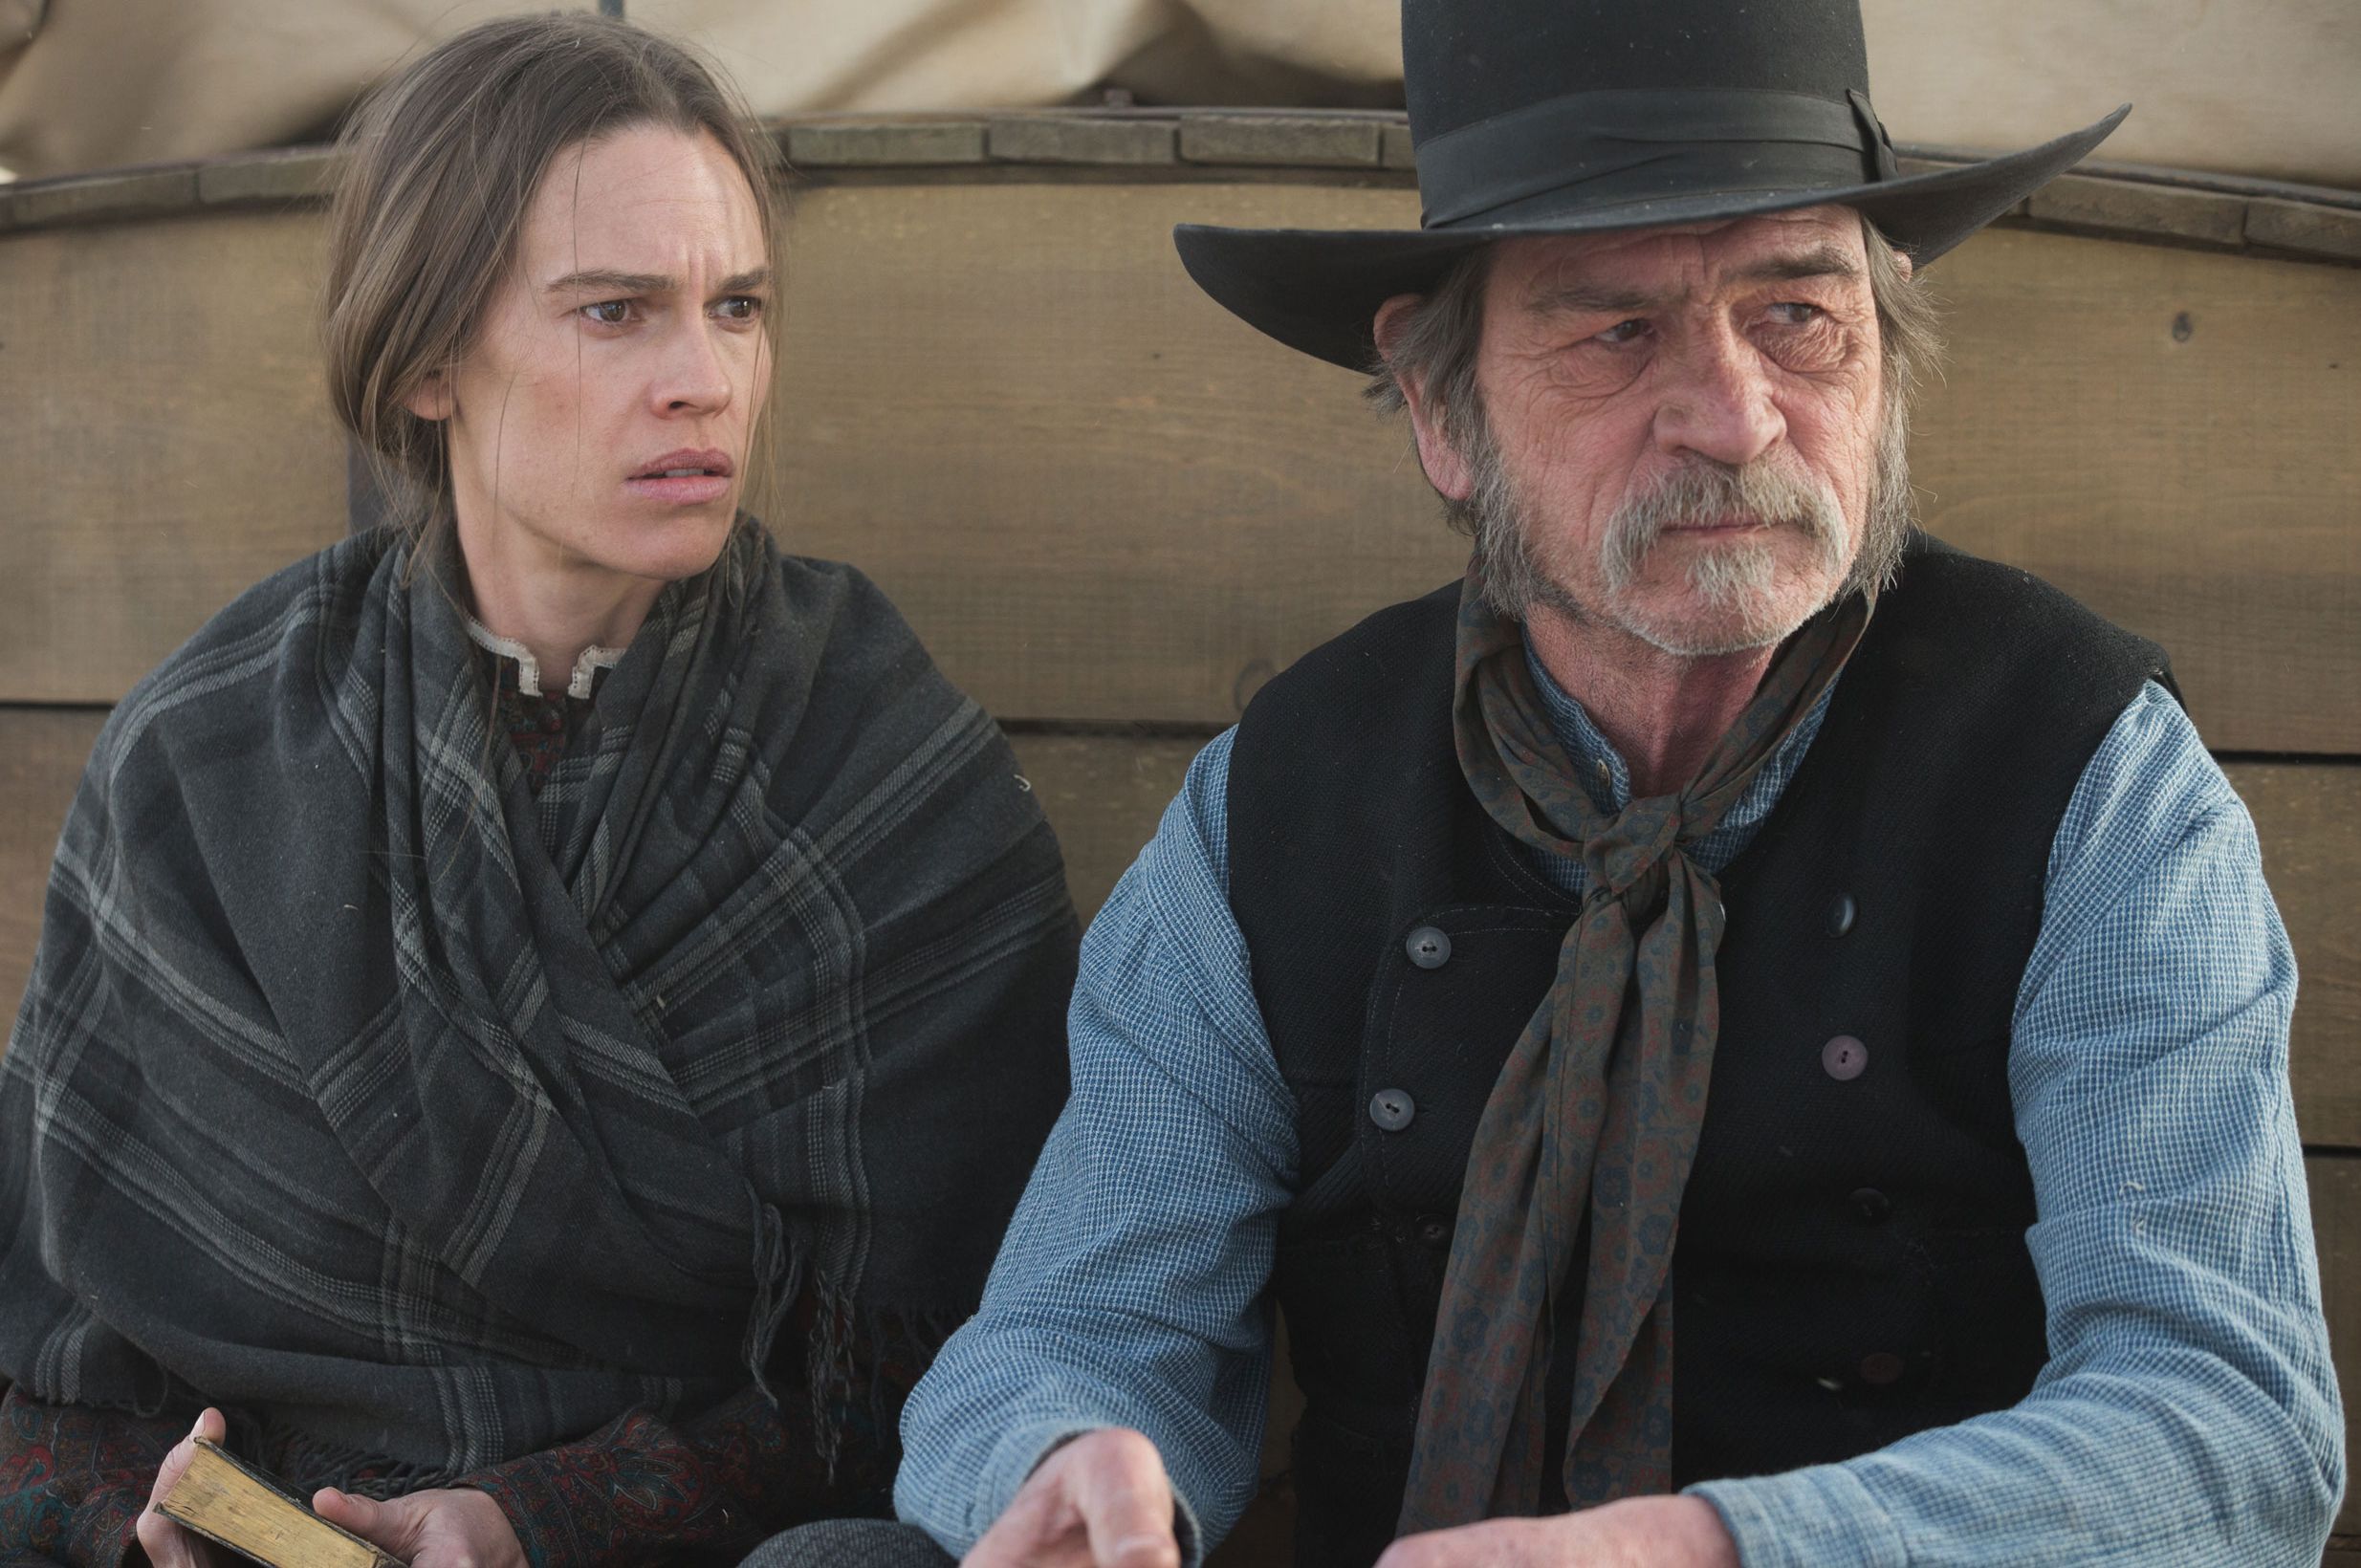 Hilary Swank and Tommy Lee Jones in The Homesman